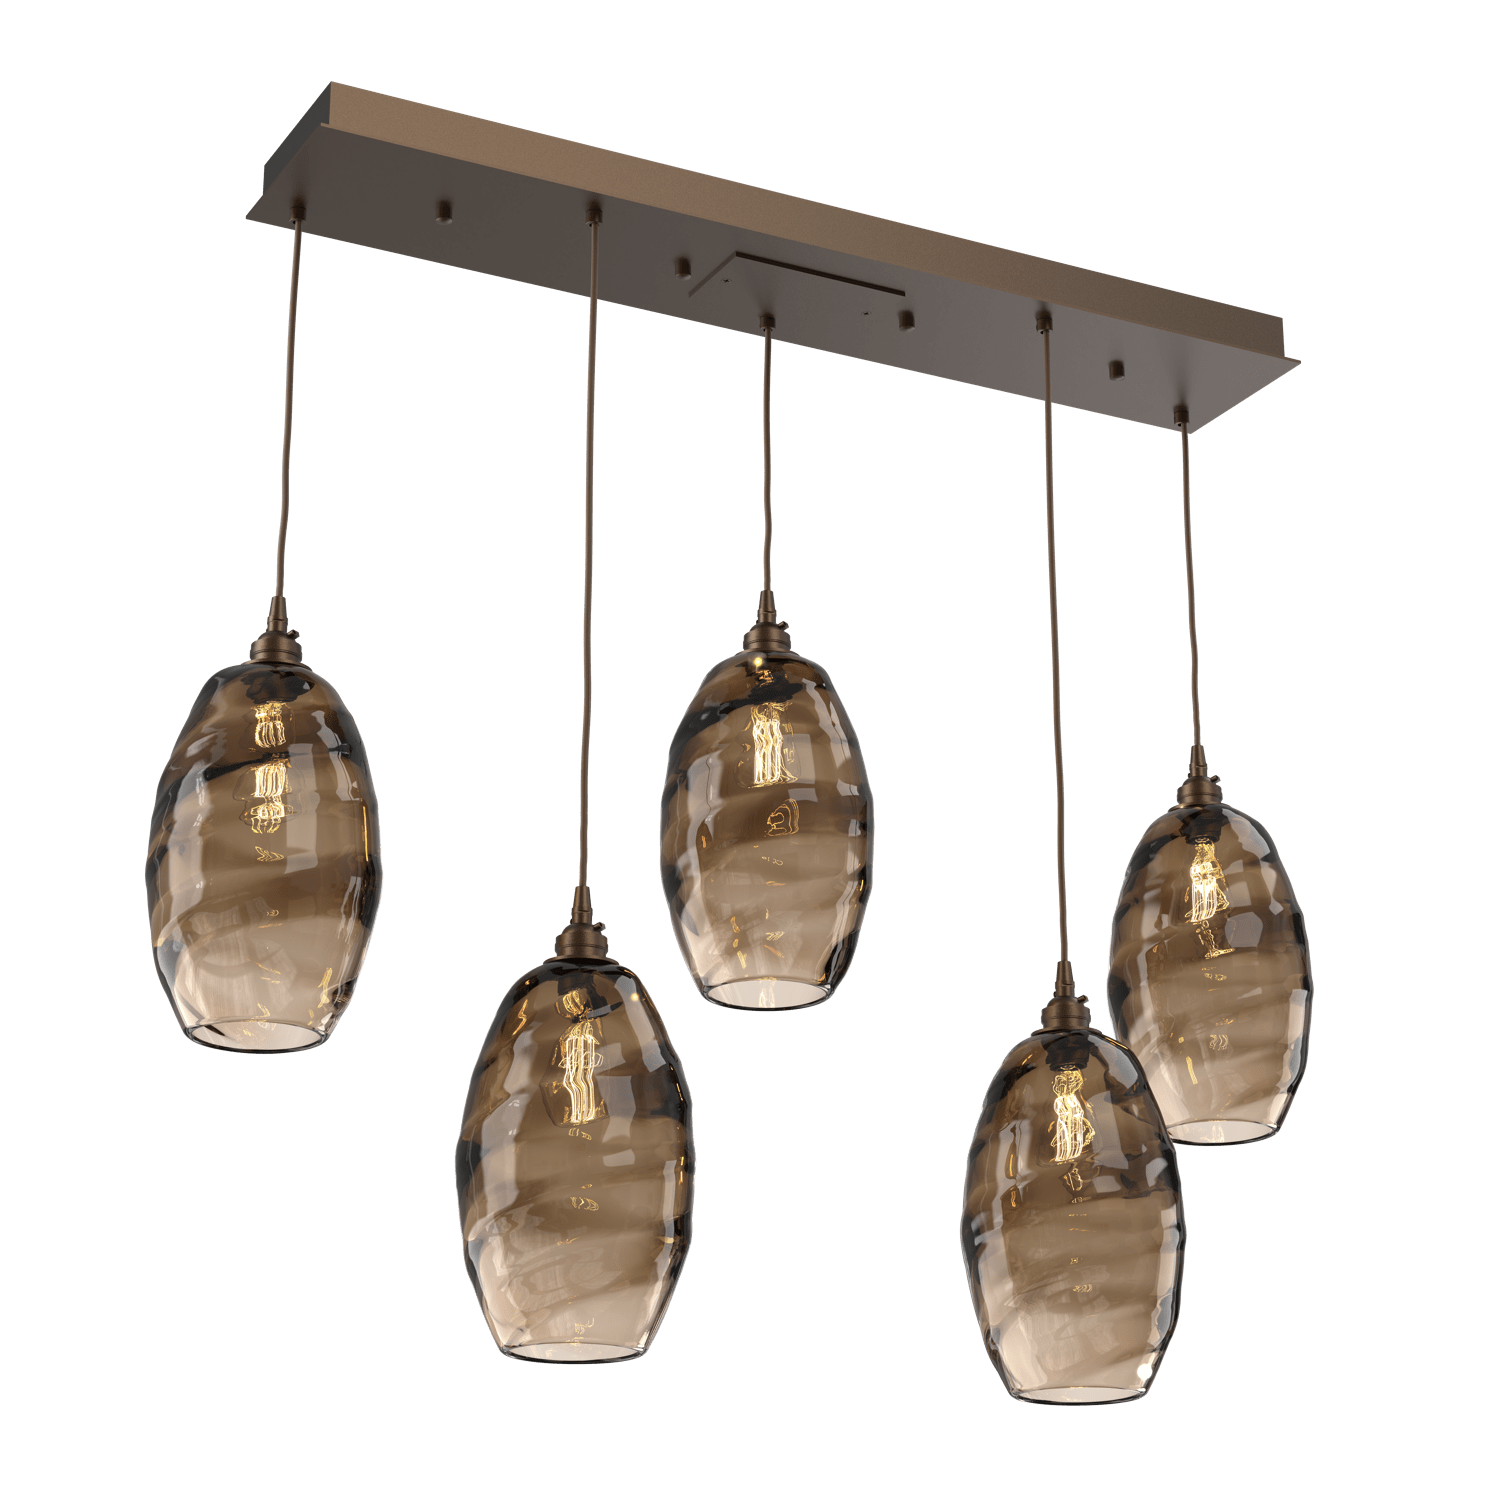 PLB0035-05-FB-OB-Hammerton-Studio-Optic-Blown-Glass-Elisse-5-light-linear-pendant-chandelier-with-flat-bronze-finish-and-optic-bronze-blown-glass-shades-and-incandescent-lamping